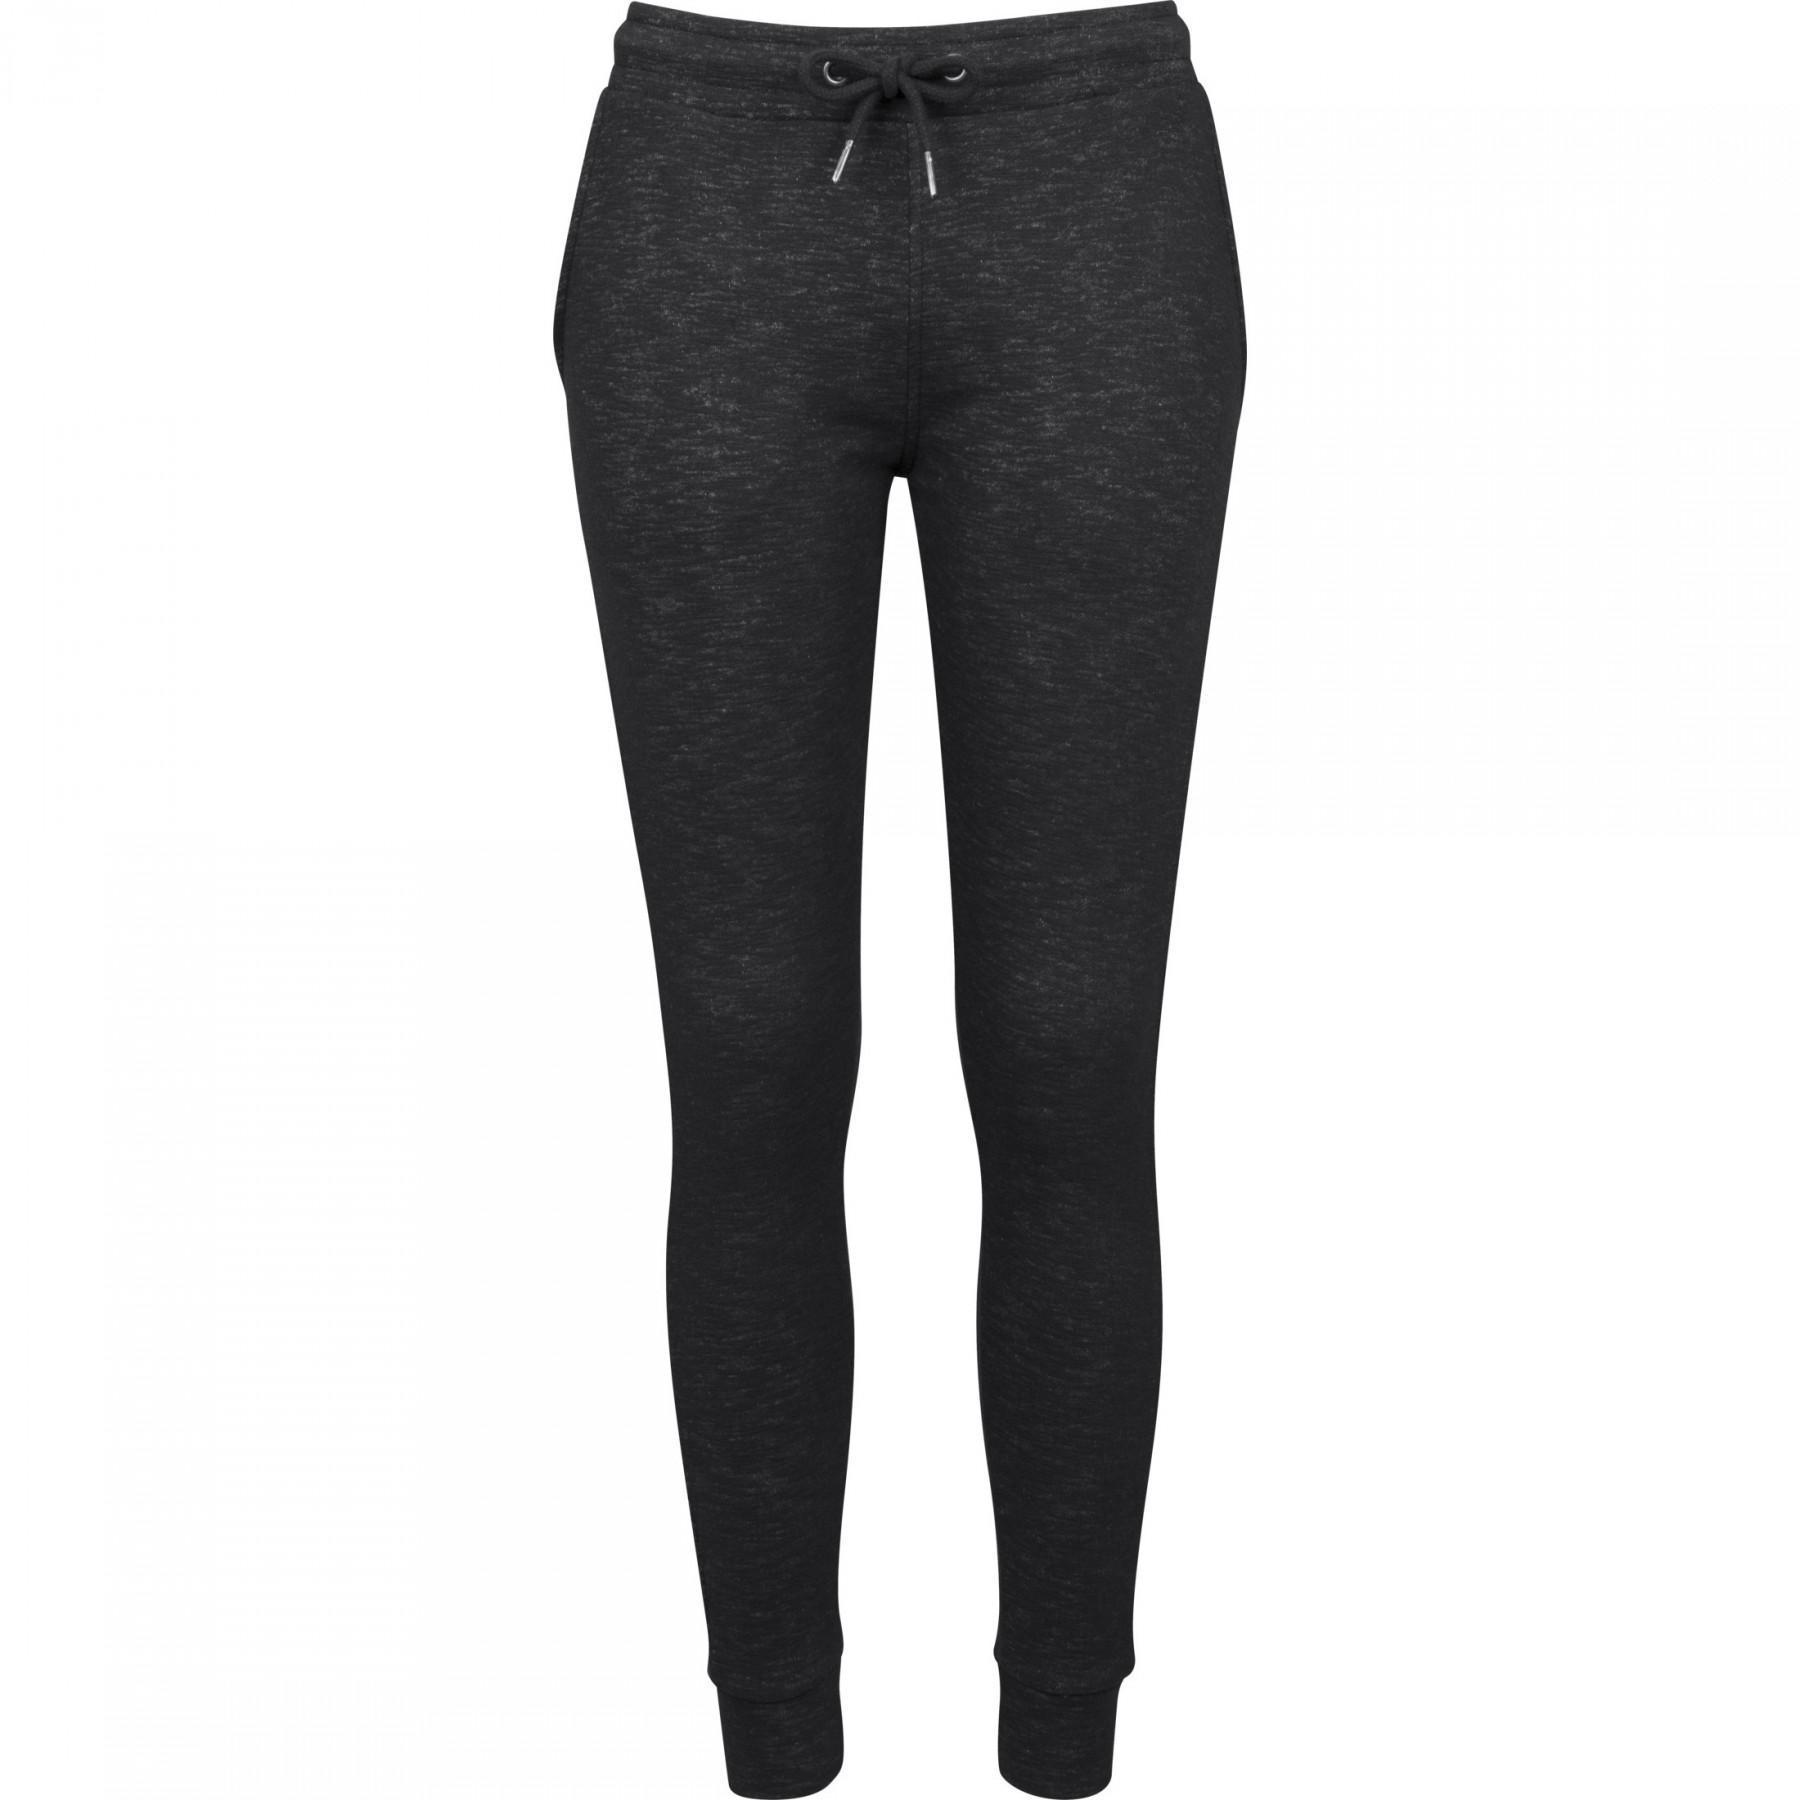 Pants woman Urban Classic pace terry